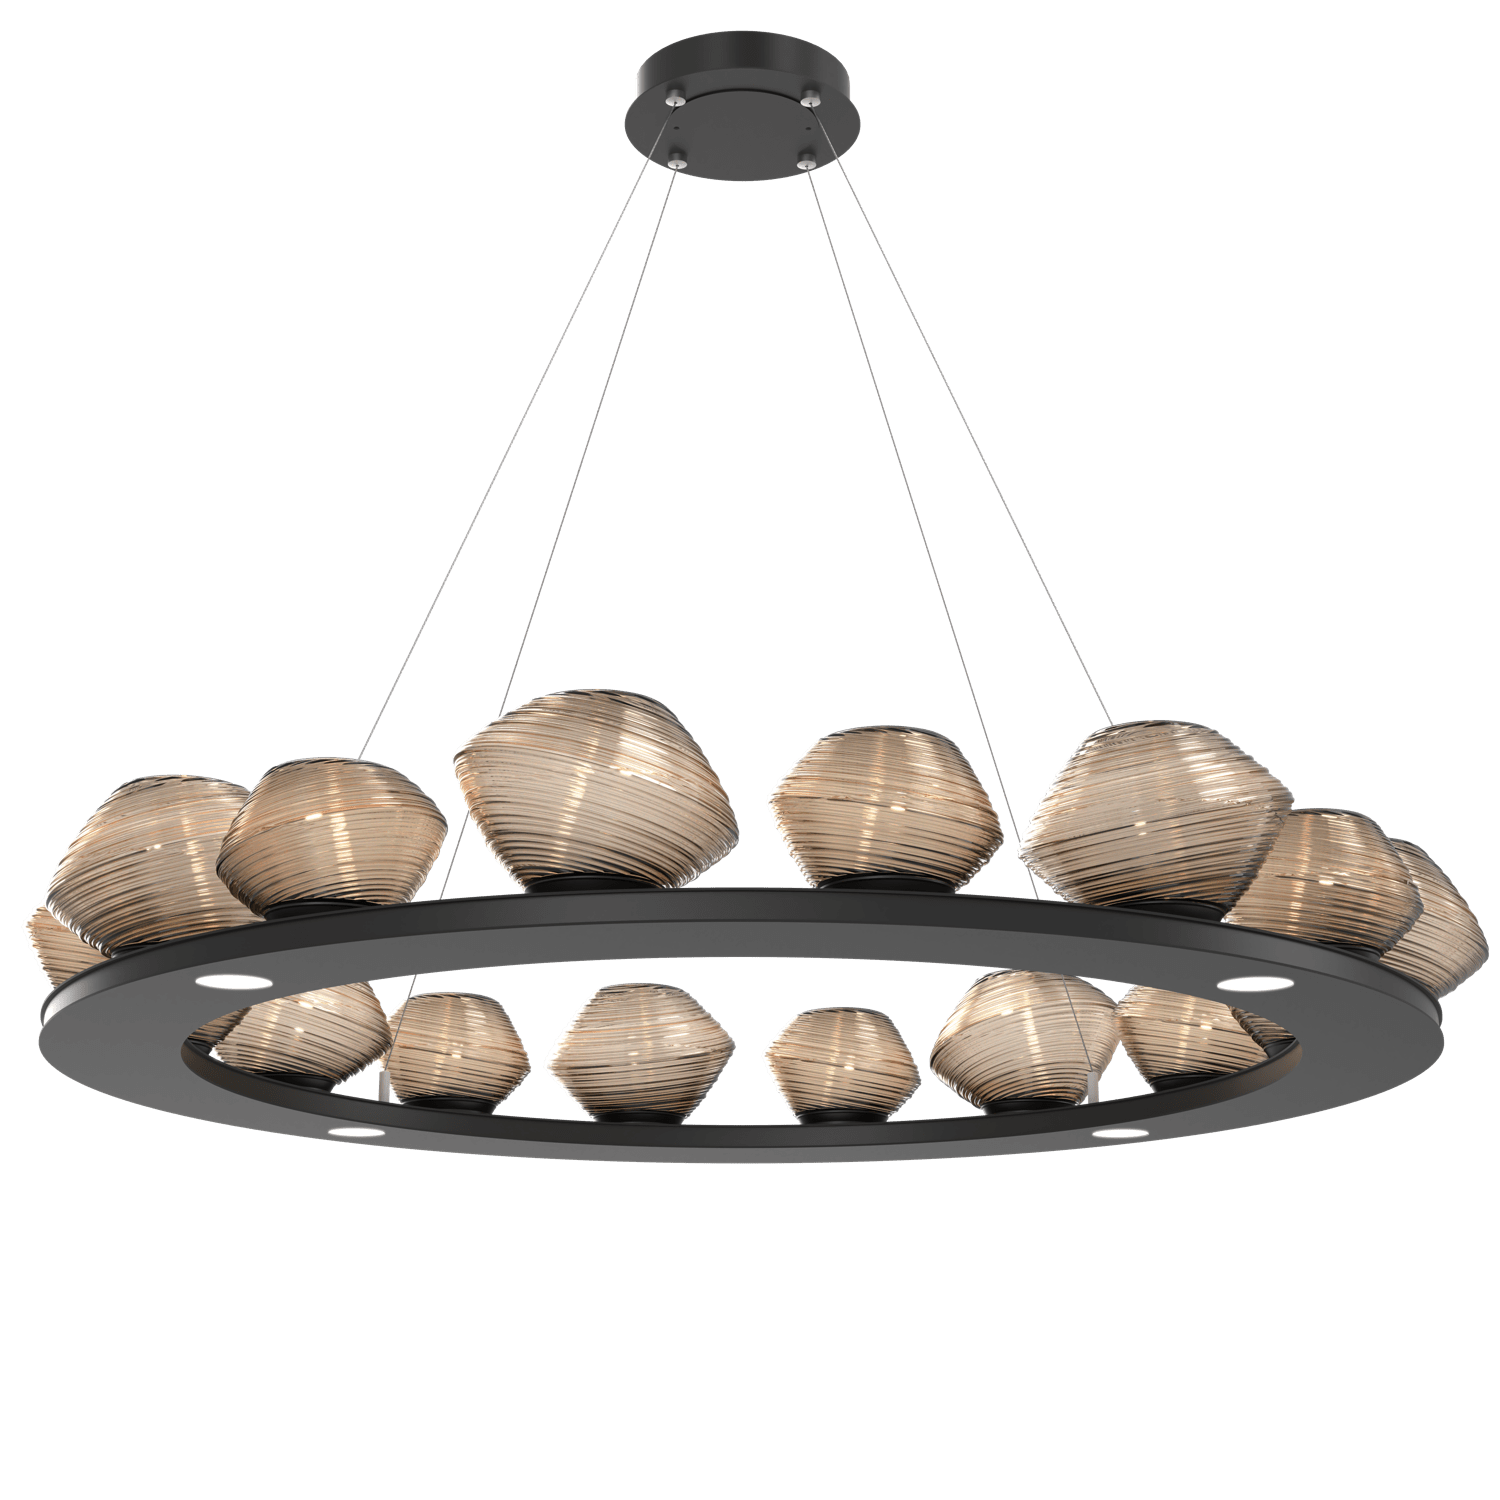 CHB0089-0D-MB-B-Hammerton-Studio-Mesa-48-inch-ring-chandelier-with-matte-black-finish-and-bronze-blown-glass-shades-and-LED-lamping